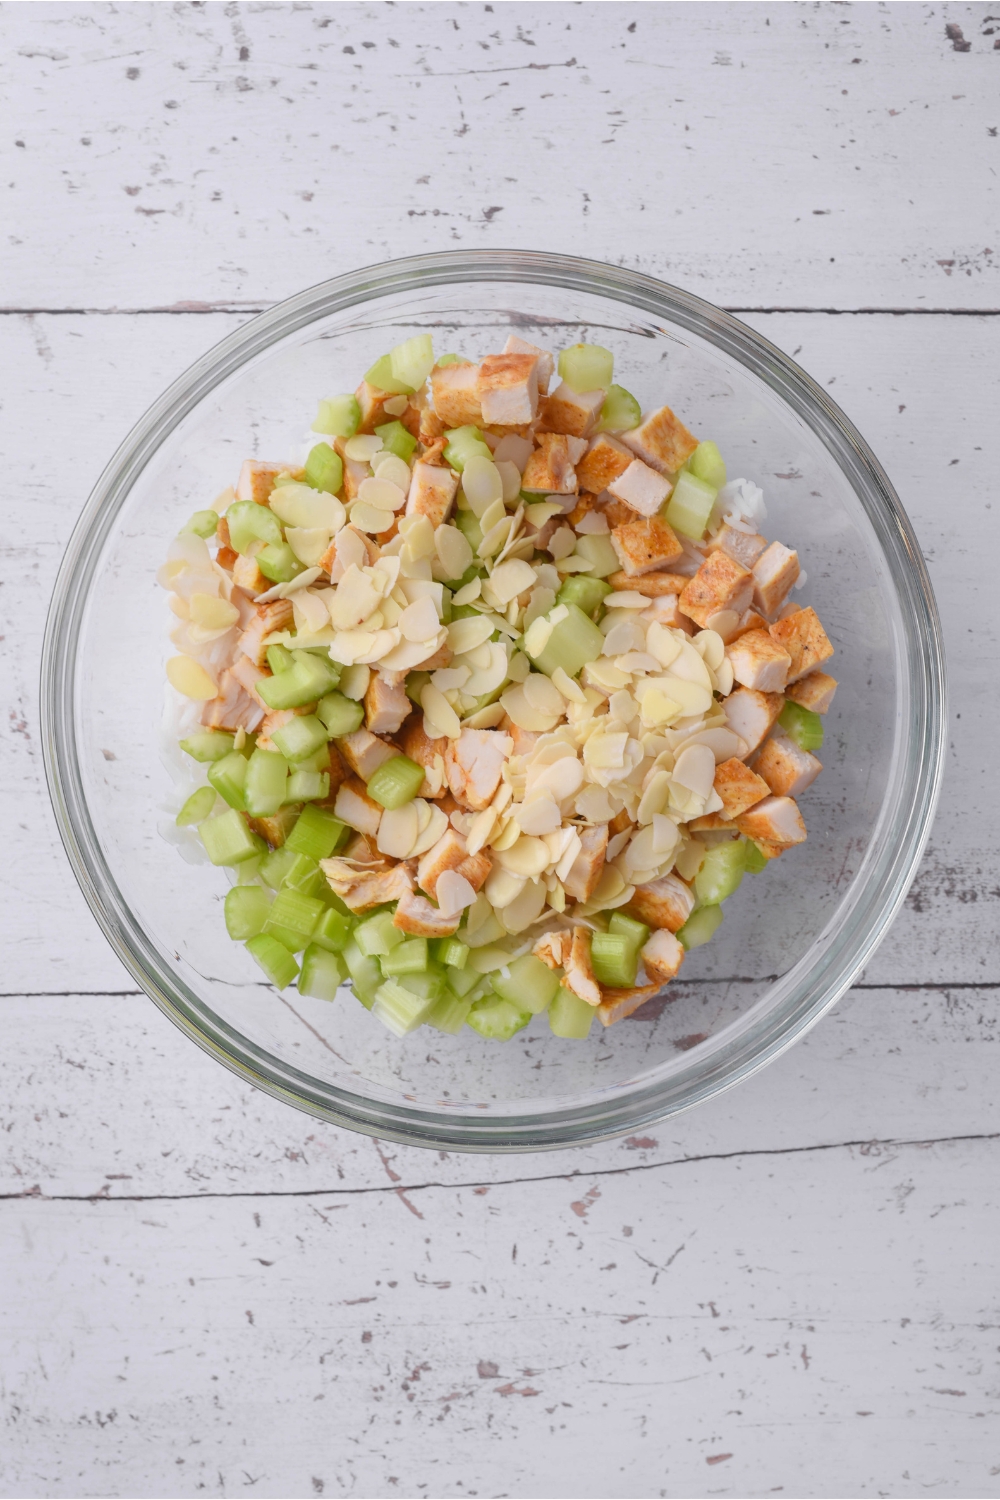 A clear bowl filled with chopped celery, slivered almonds, chopped chicken, and white rice.